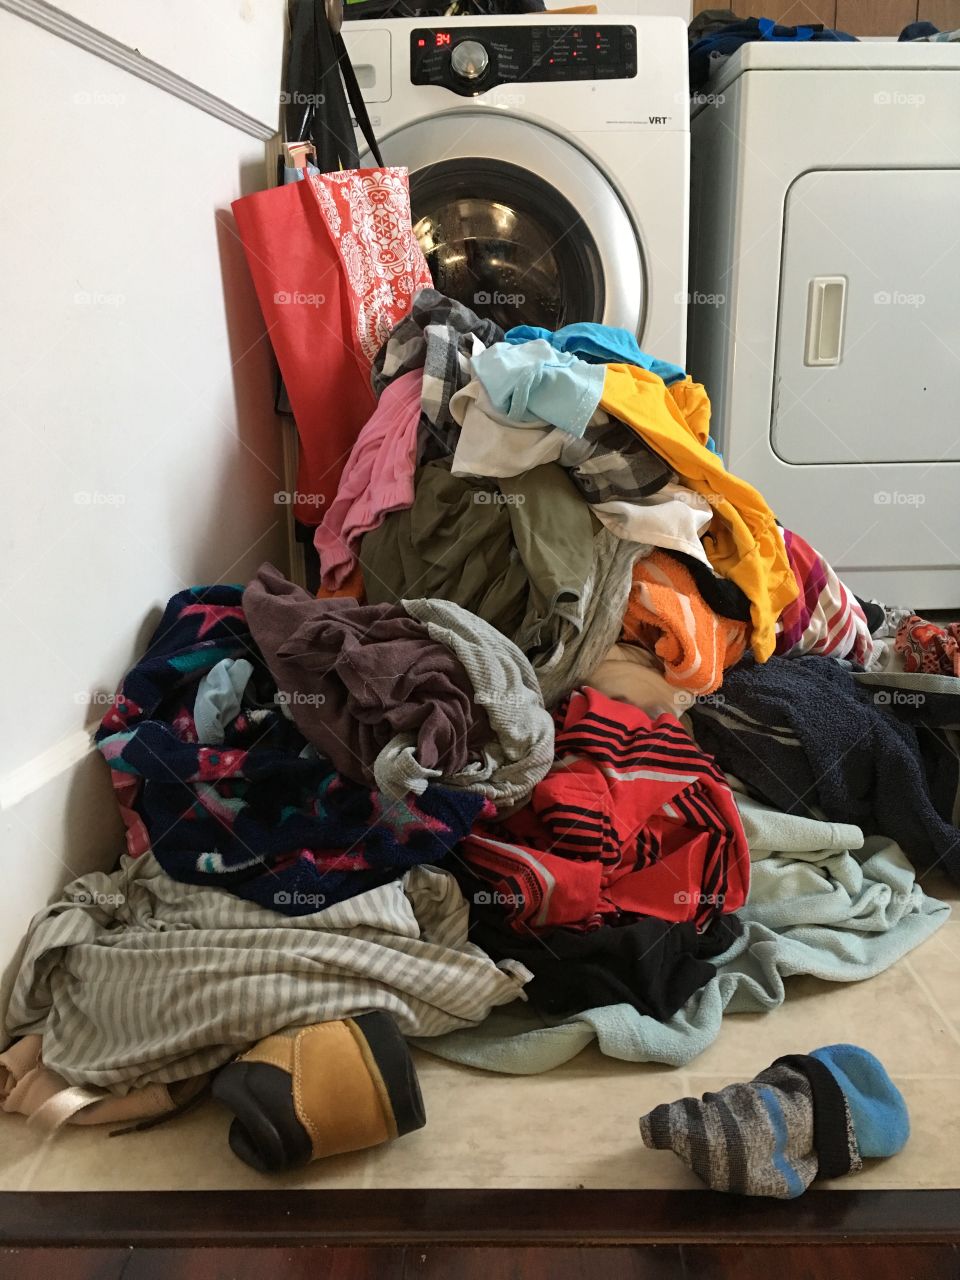 A pile of laundry 